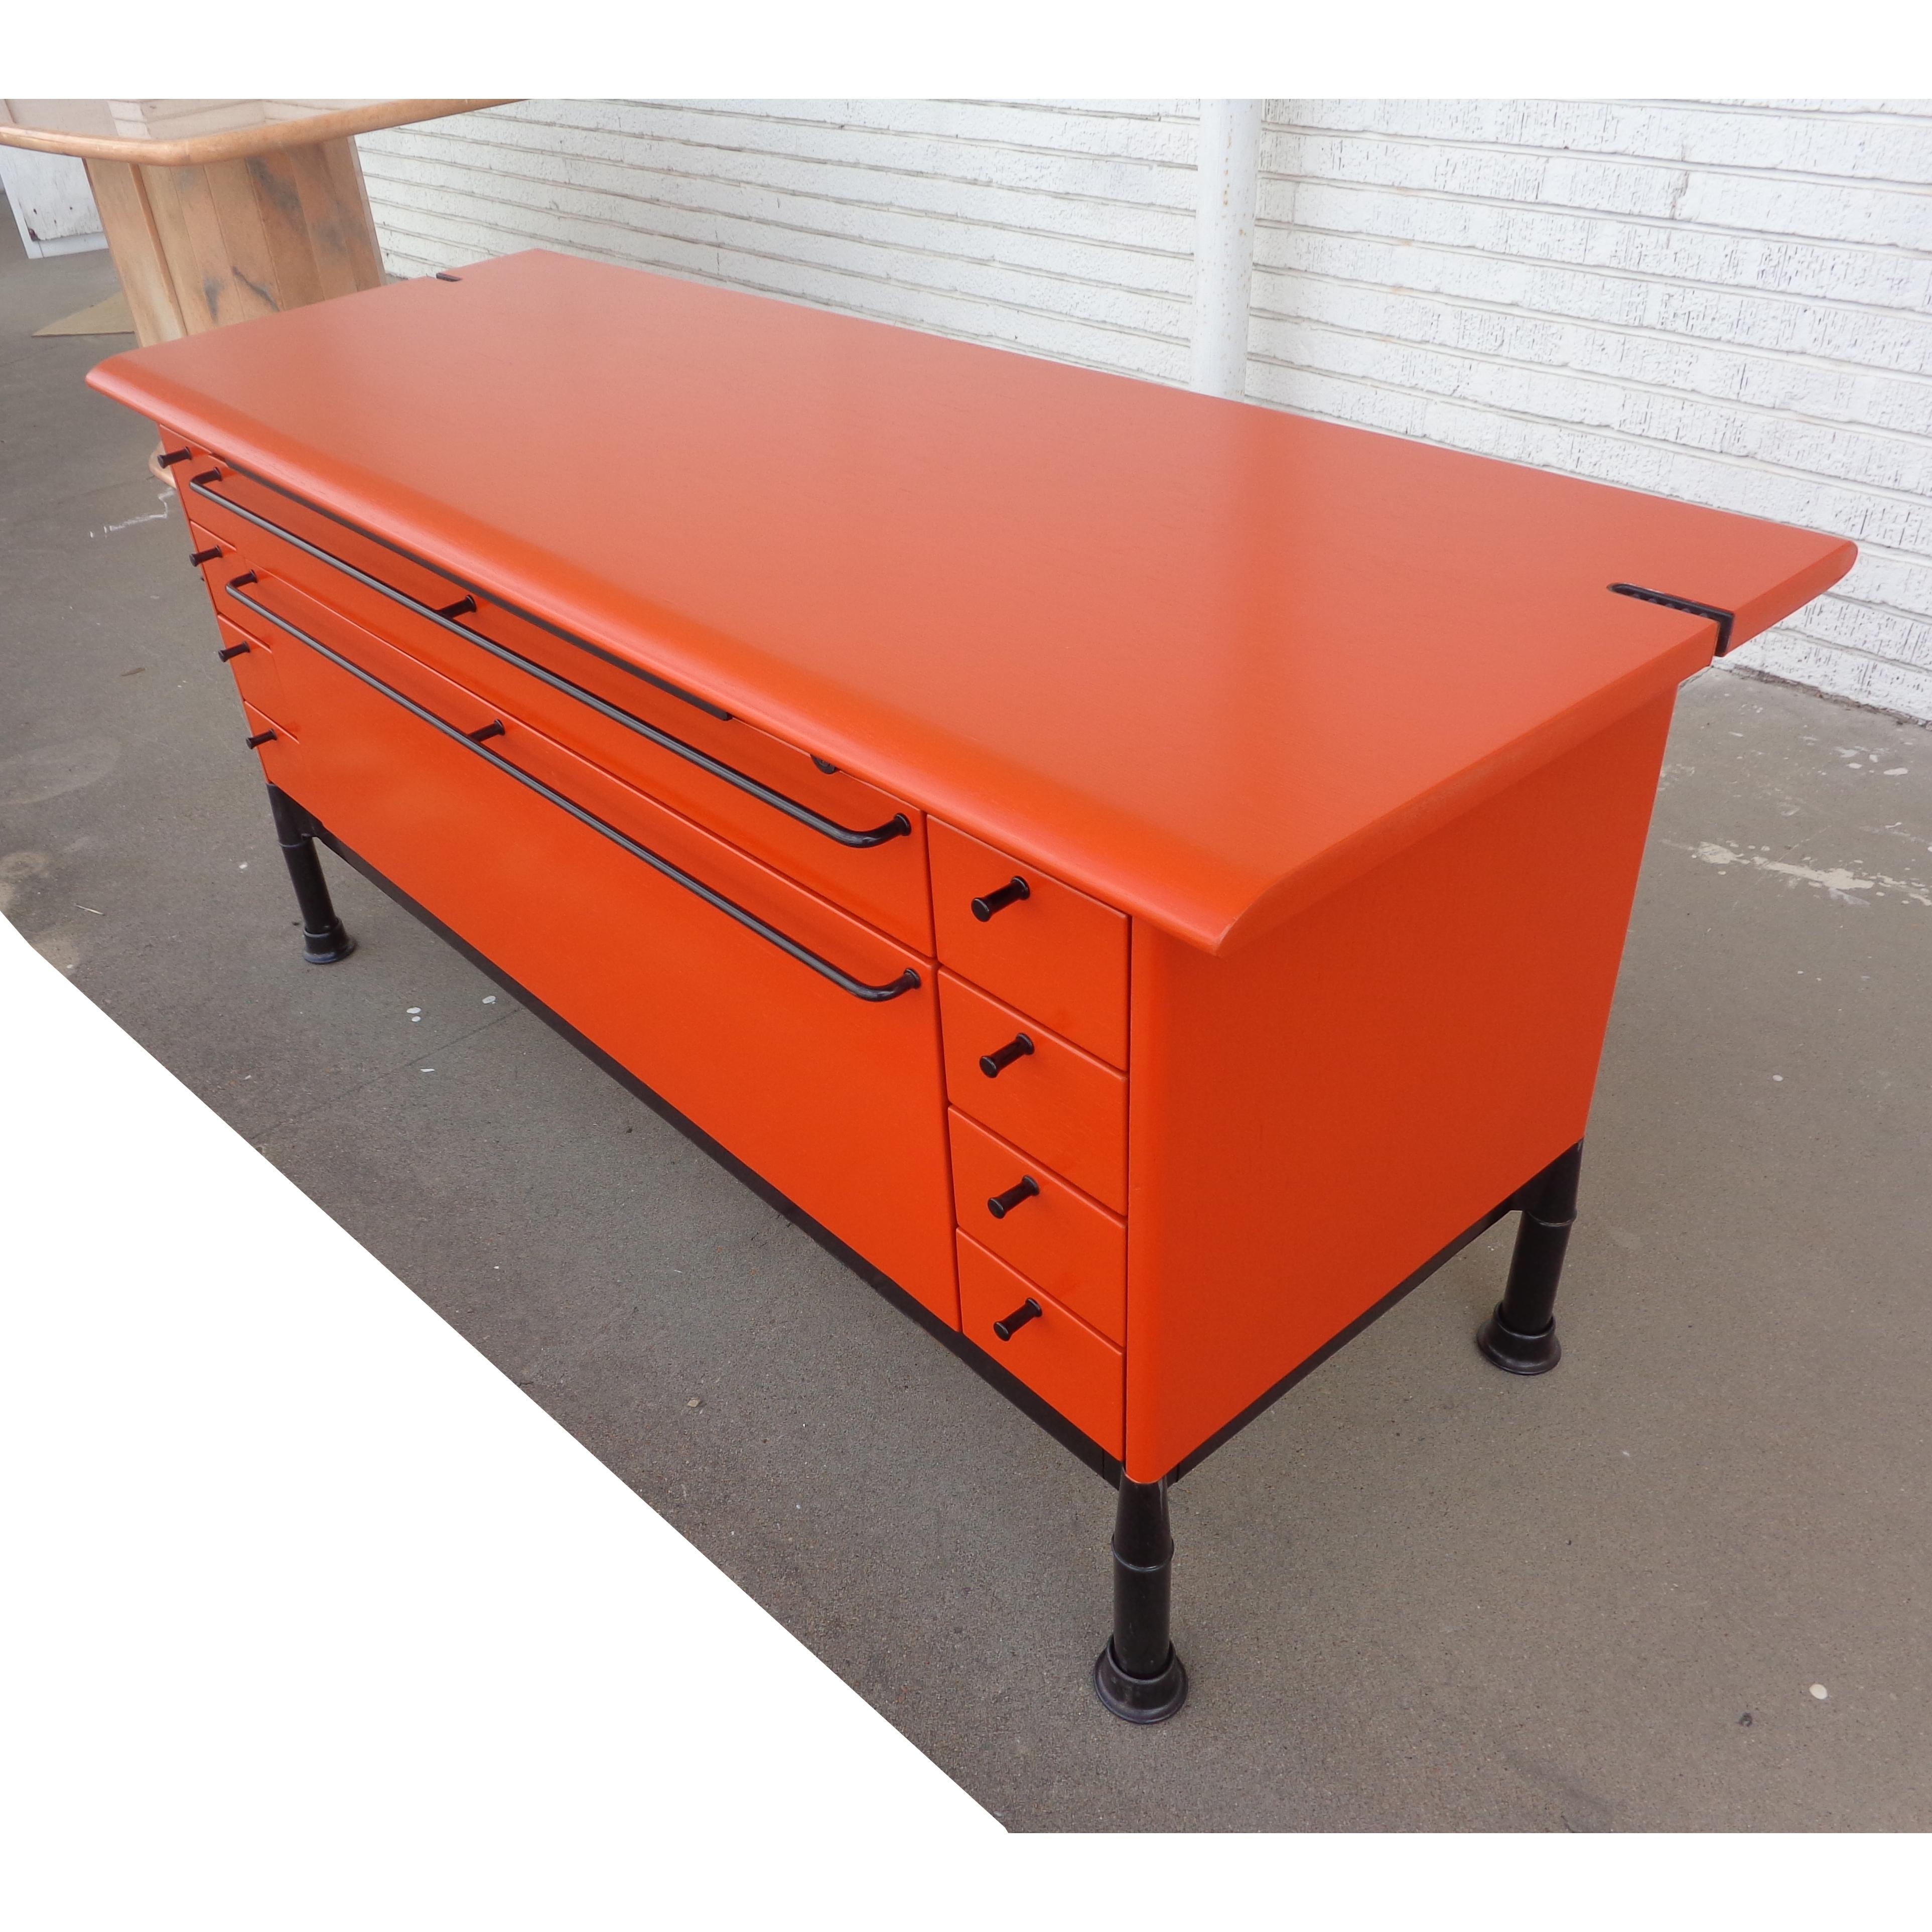 Herman Miller Geoff Hollington Relay Series credenza

Recently restored in bright orange this classic credenza from the Relay series has multiple drawers and a pullout work surface. 

8 shoebox drawers
2 large drawers
Pull-out work